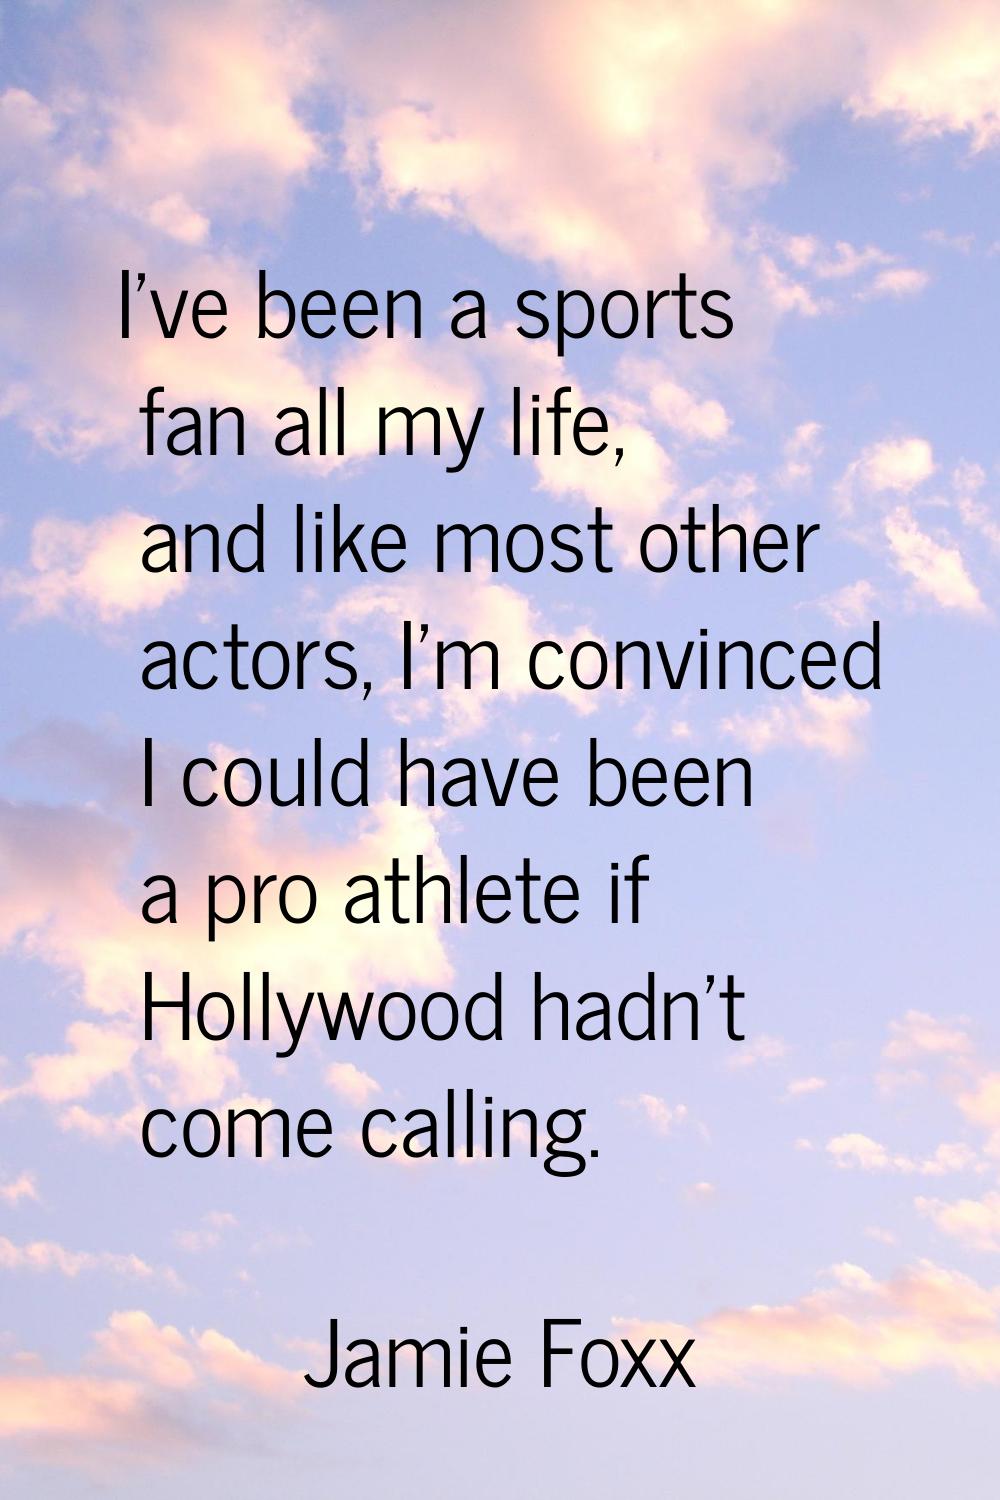 I've been a sports fan all my life, and like most other actors, I'm convinced I could have been a p